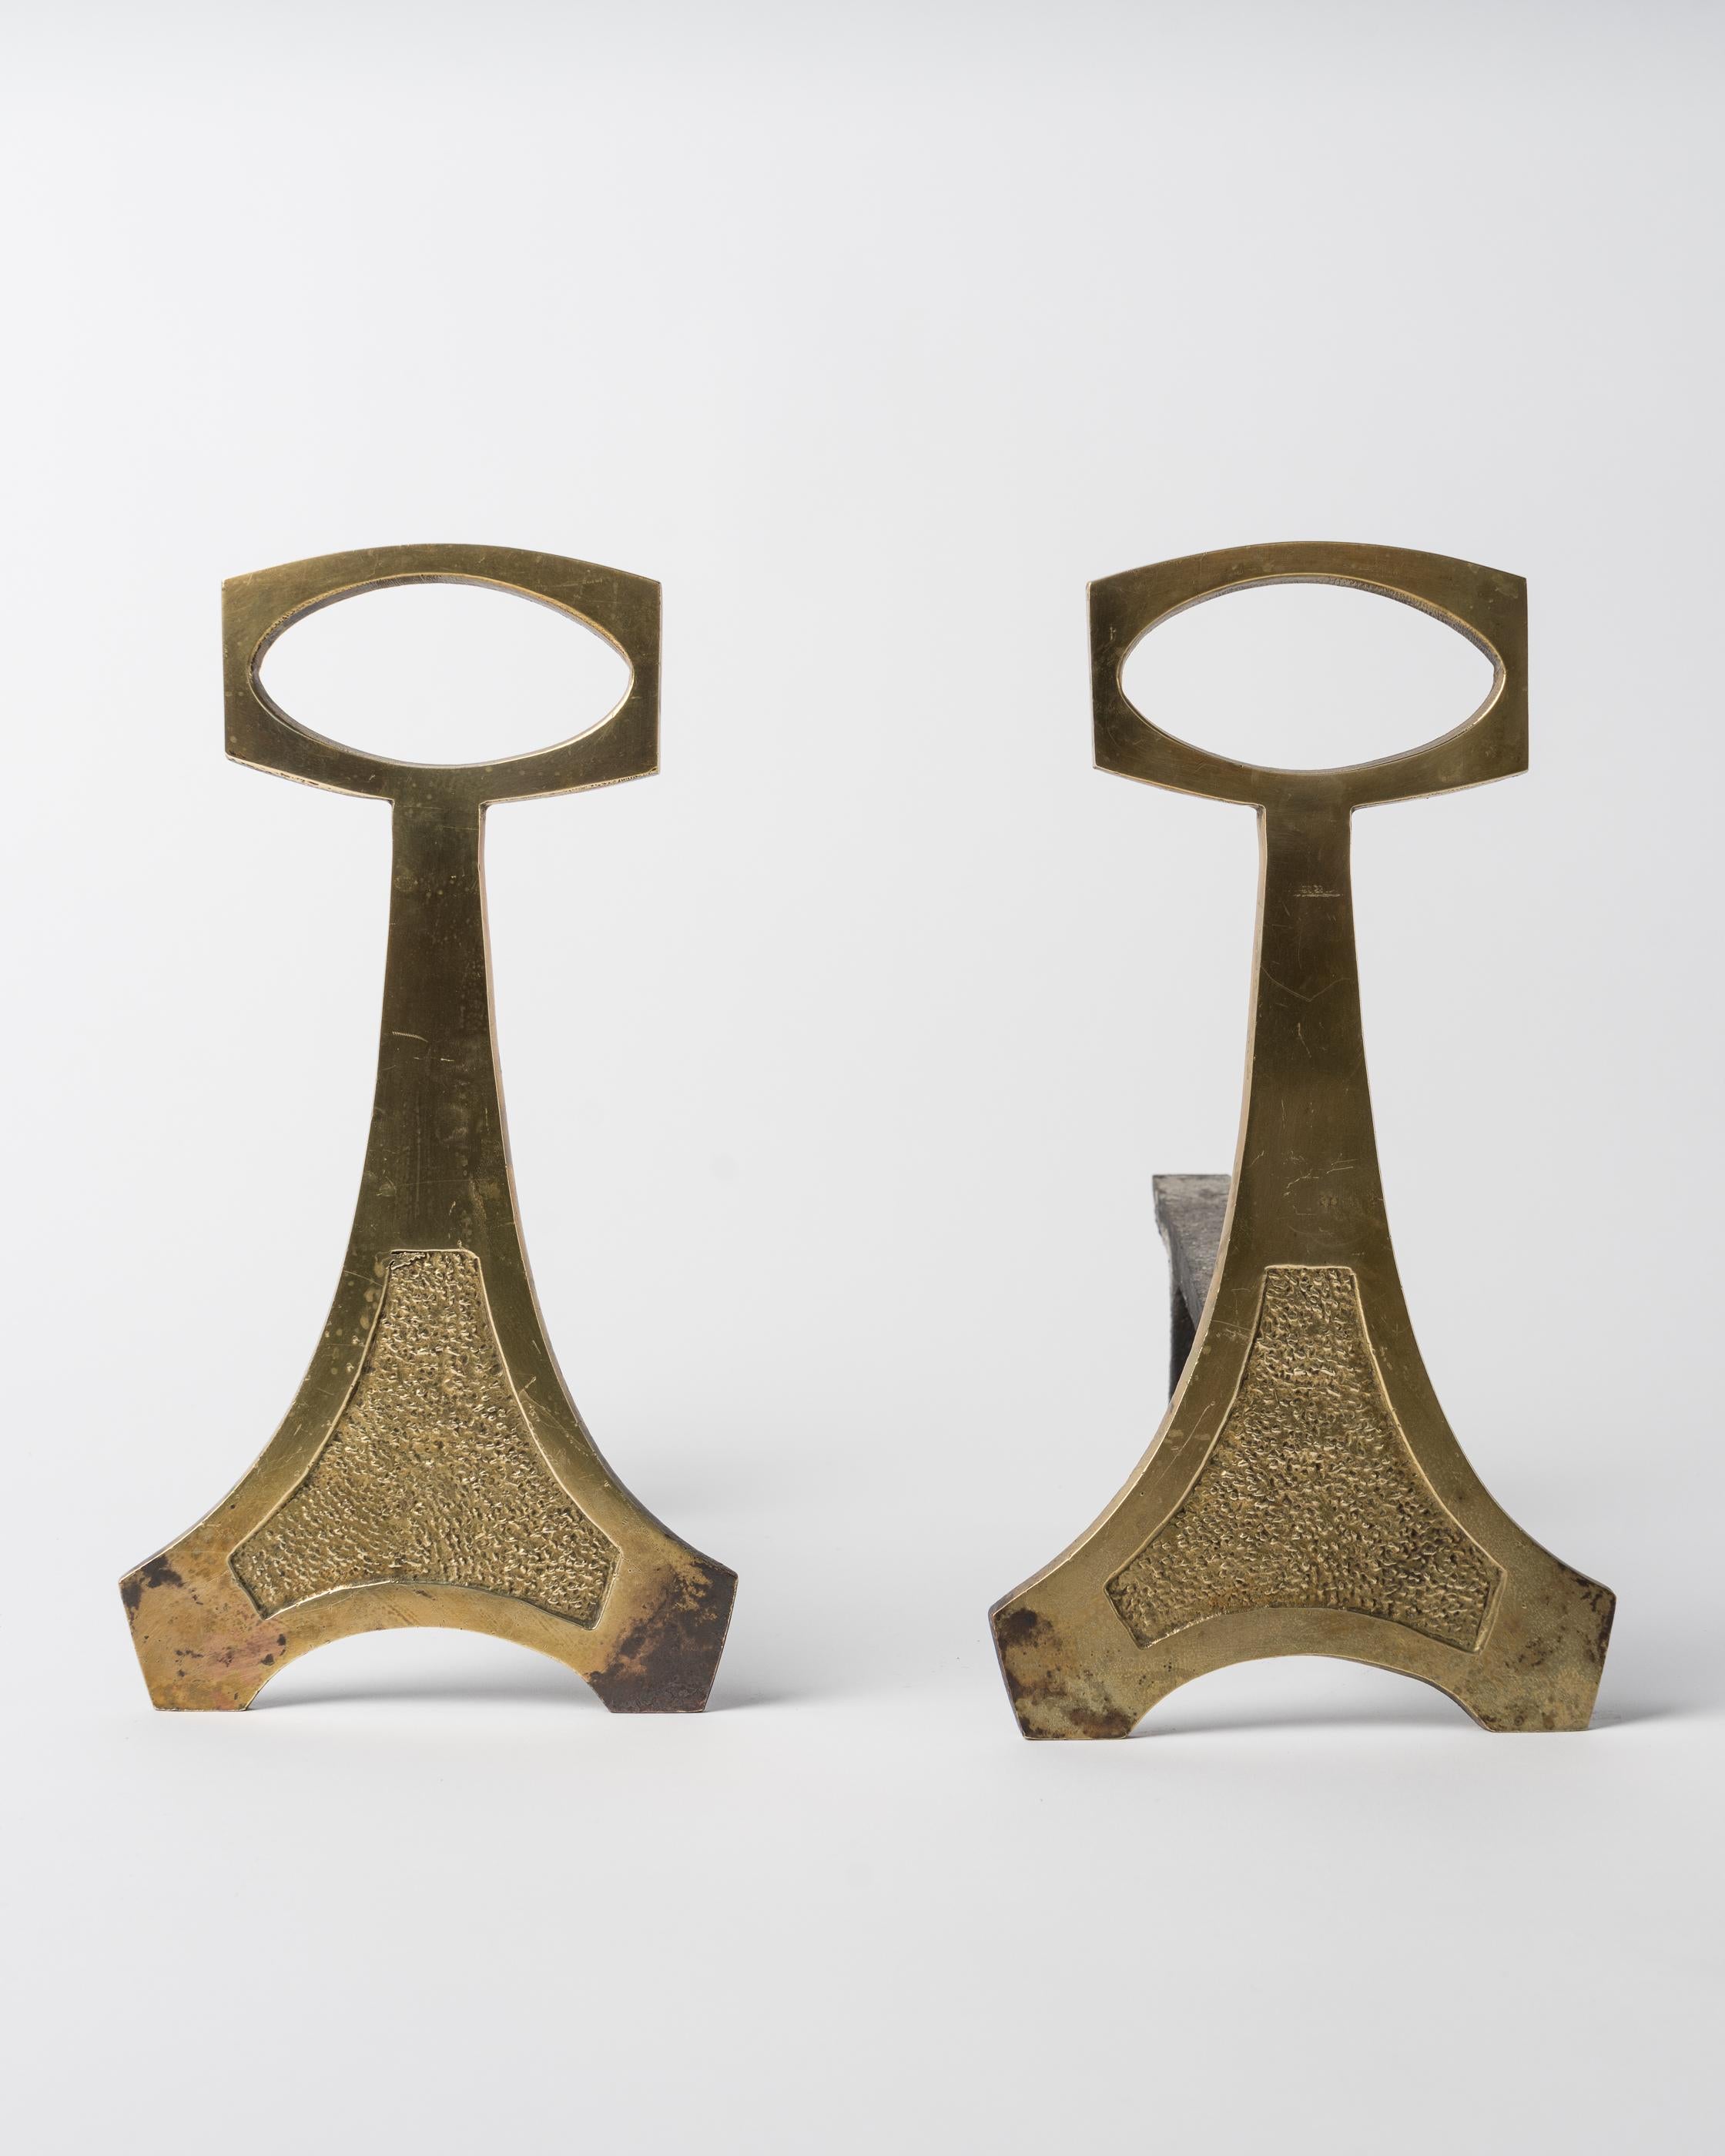 Elegant pair of Art Deco style minimalist patinated bronze andirons with a unique etched motif in the center. These andirons will ship from France and can be returned to France or to a LIC NY location.